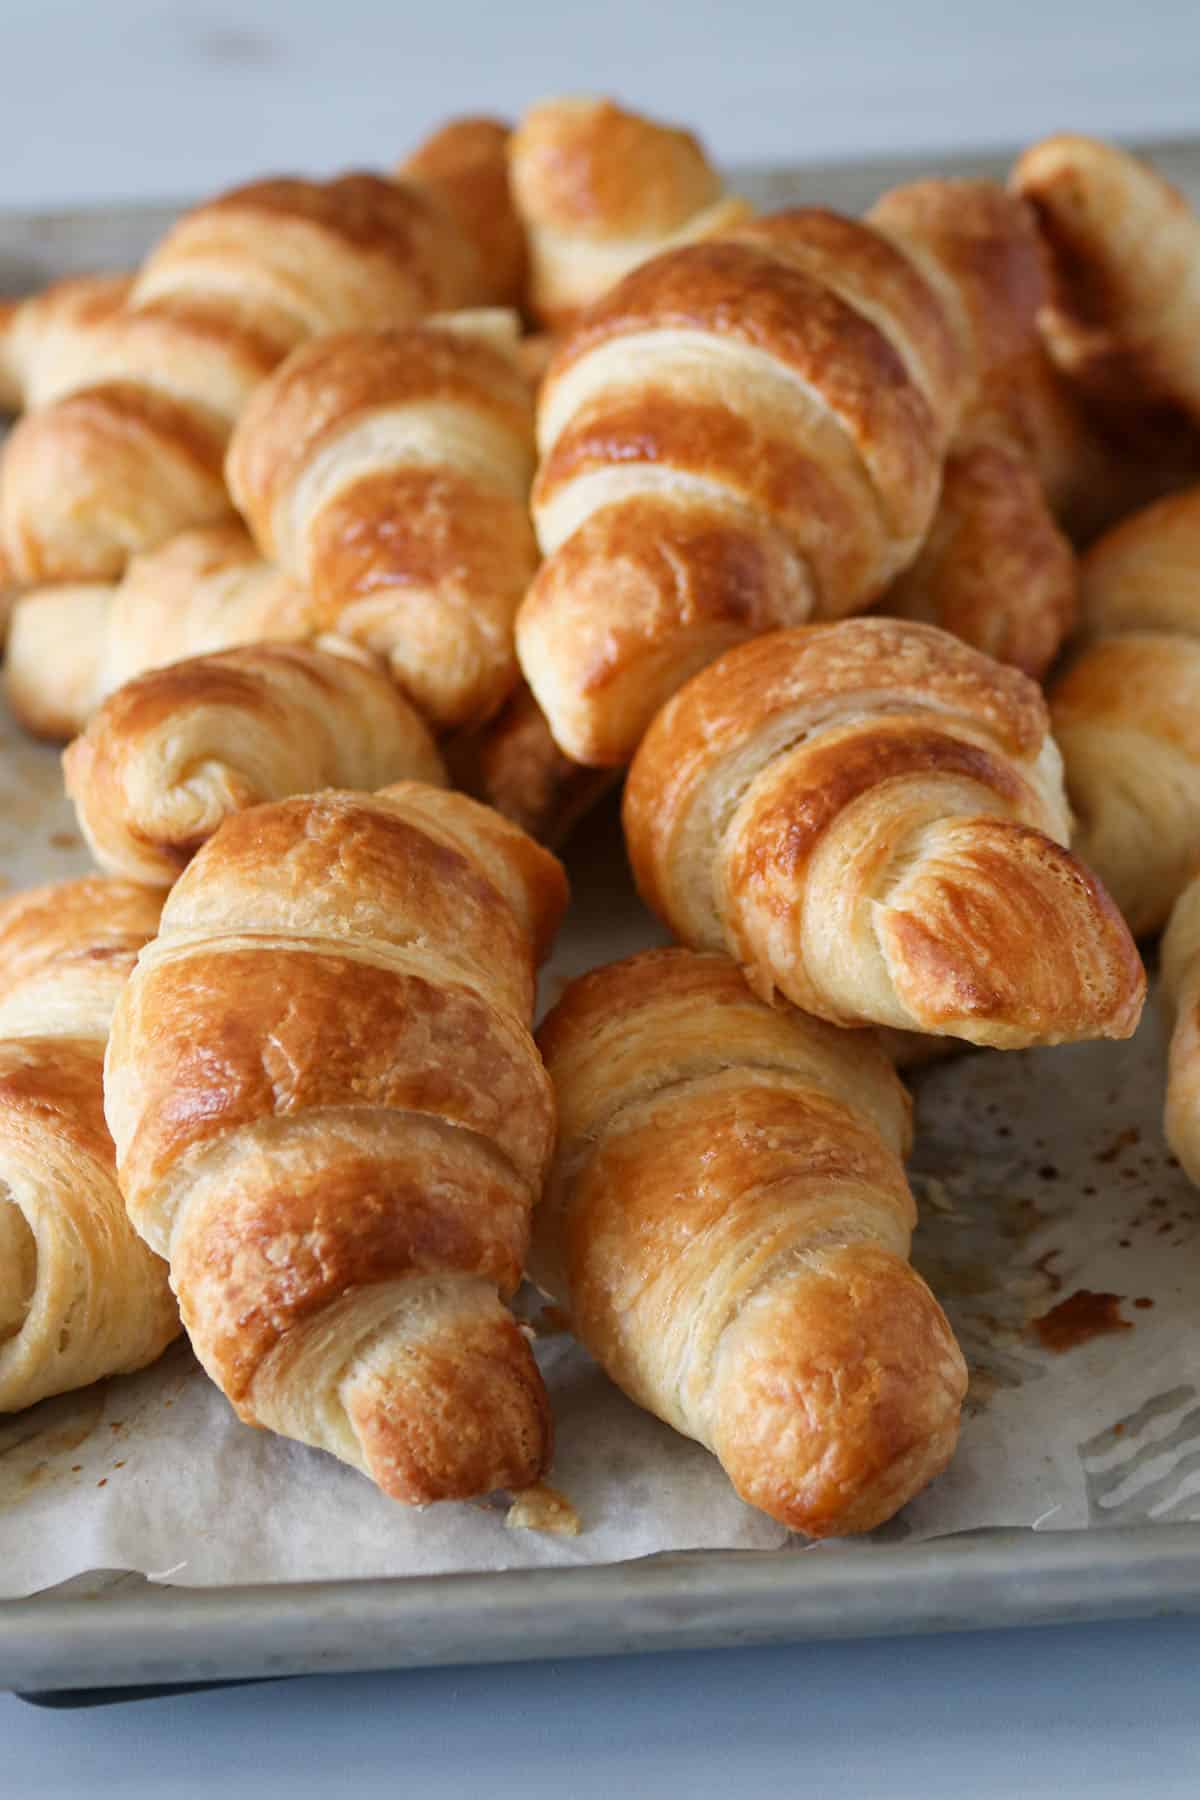 Croissants piled on a baking pan.